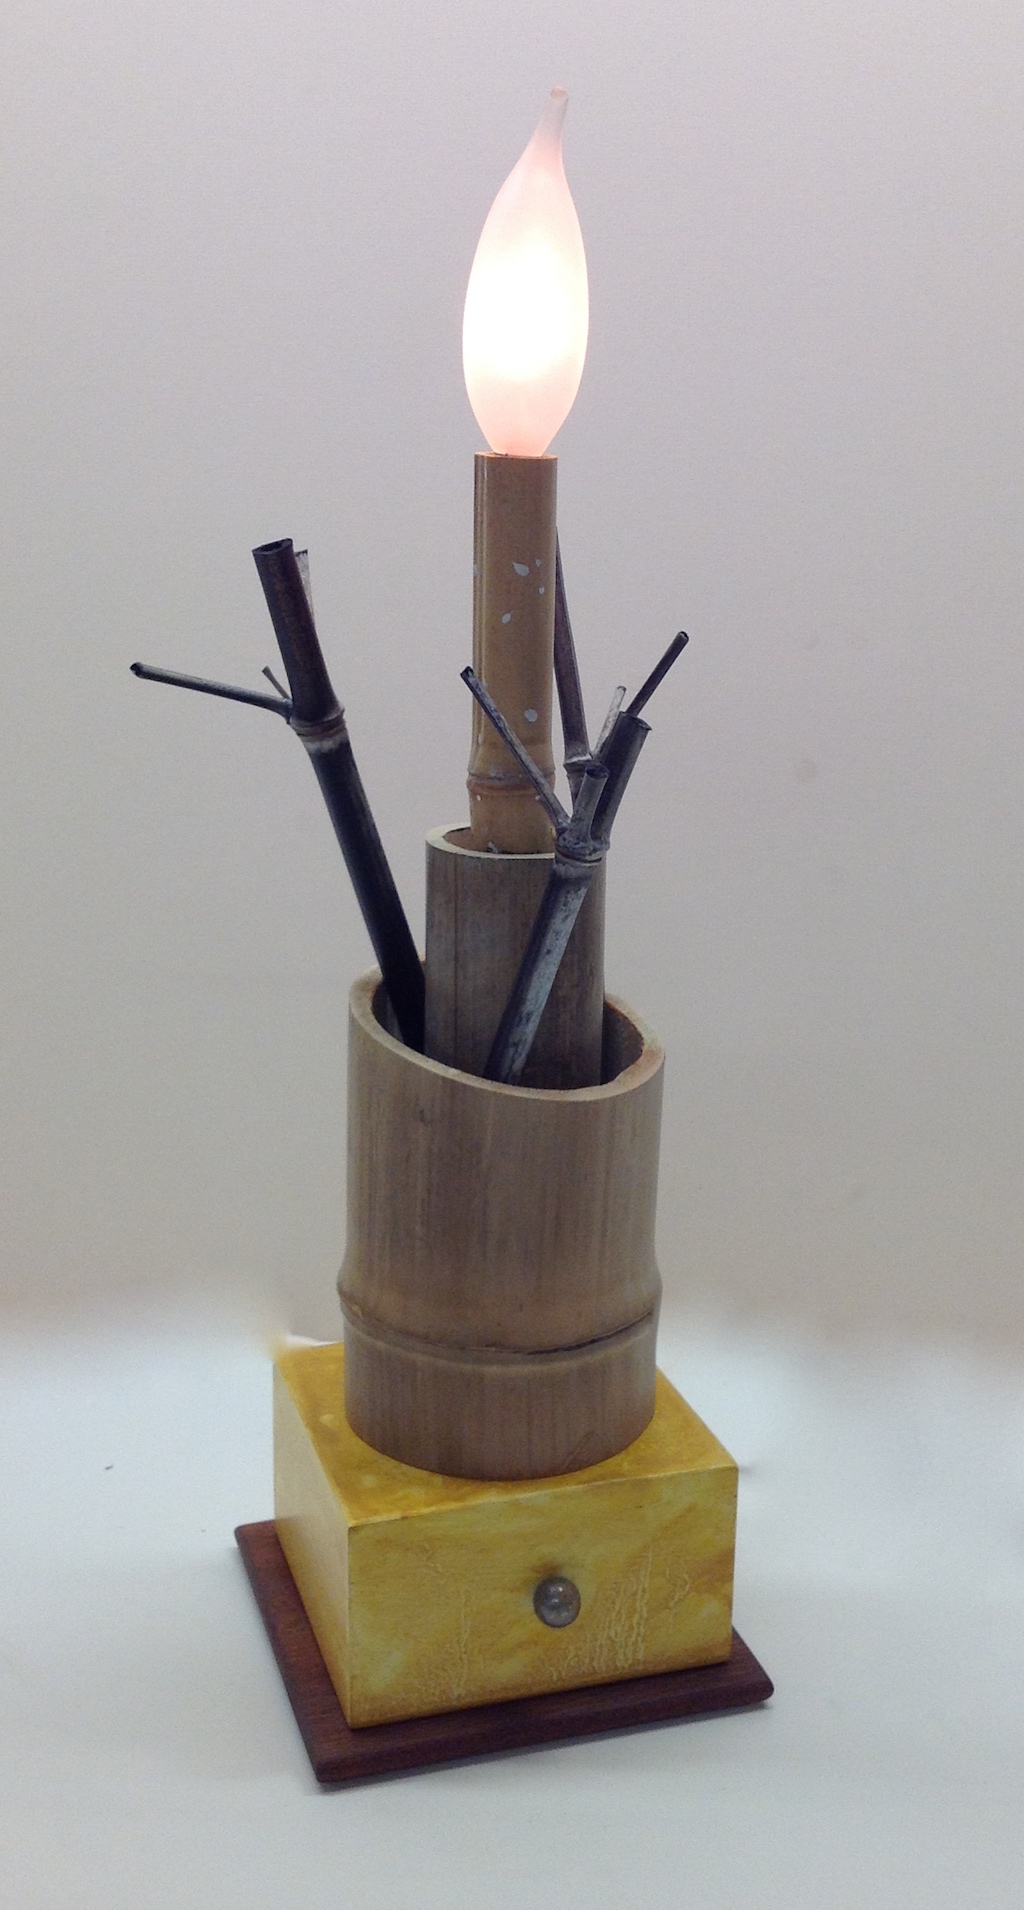 Garry Knox Bennett, "Bamboo Container with One Light and Stems"